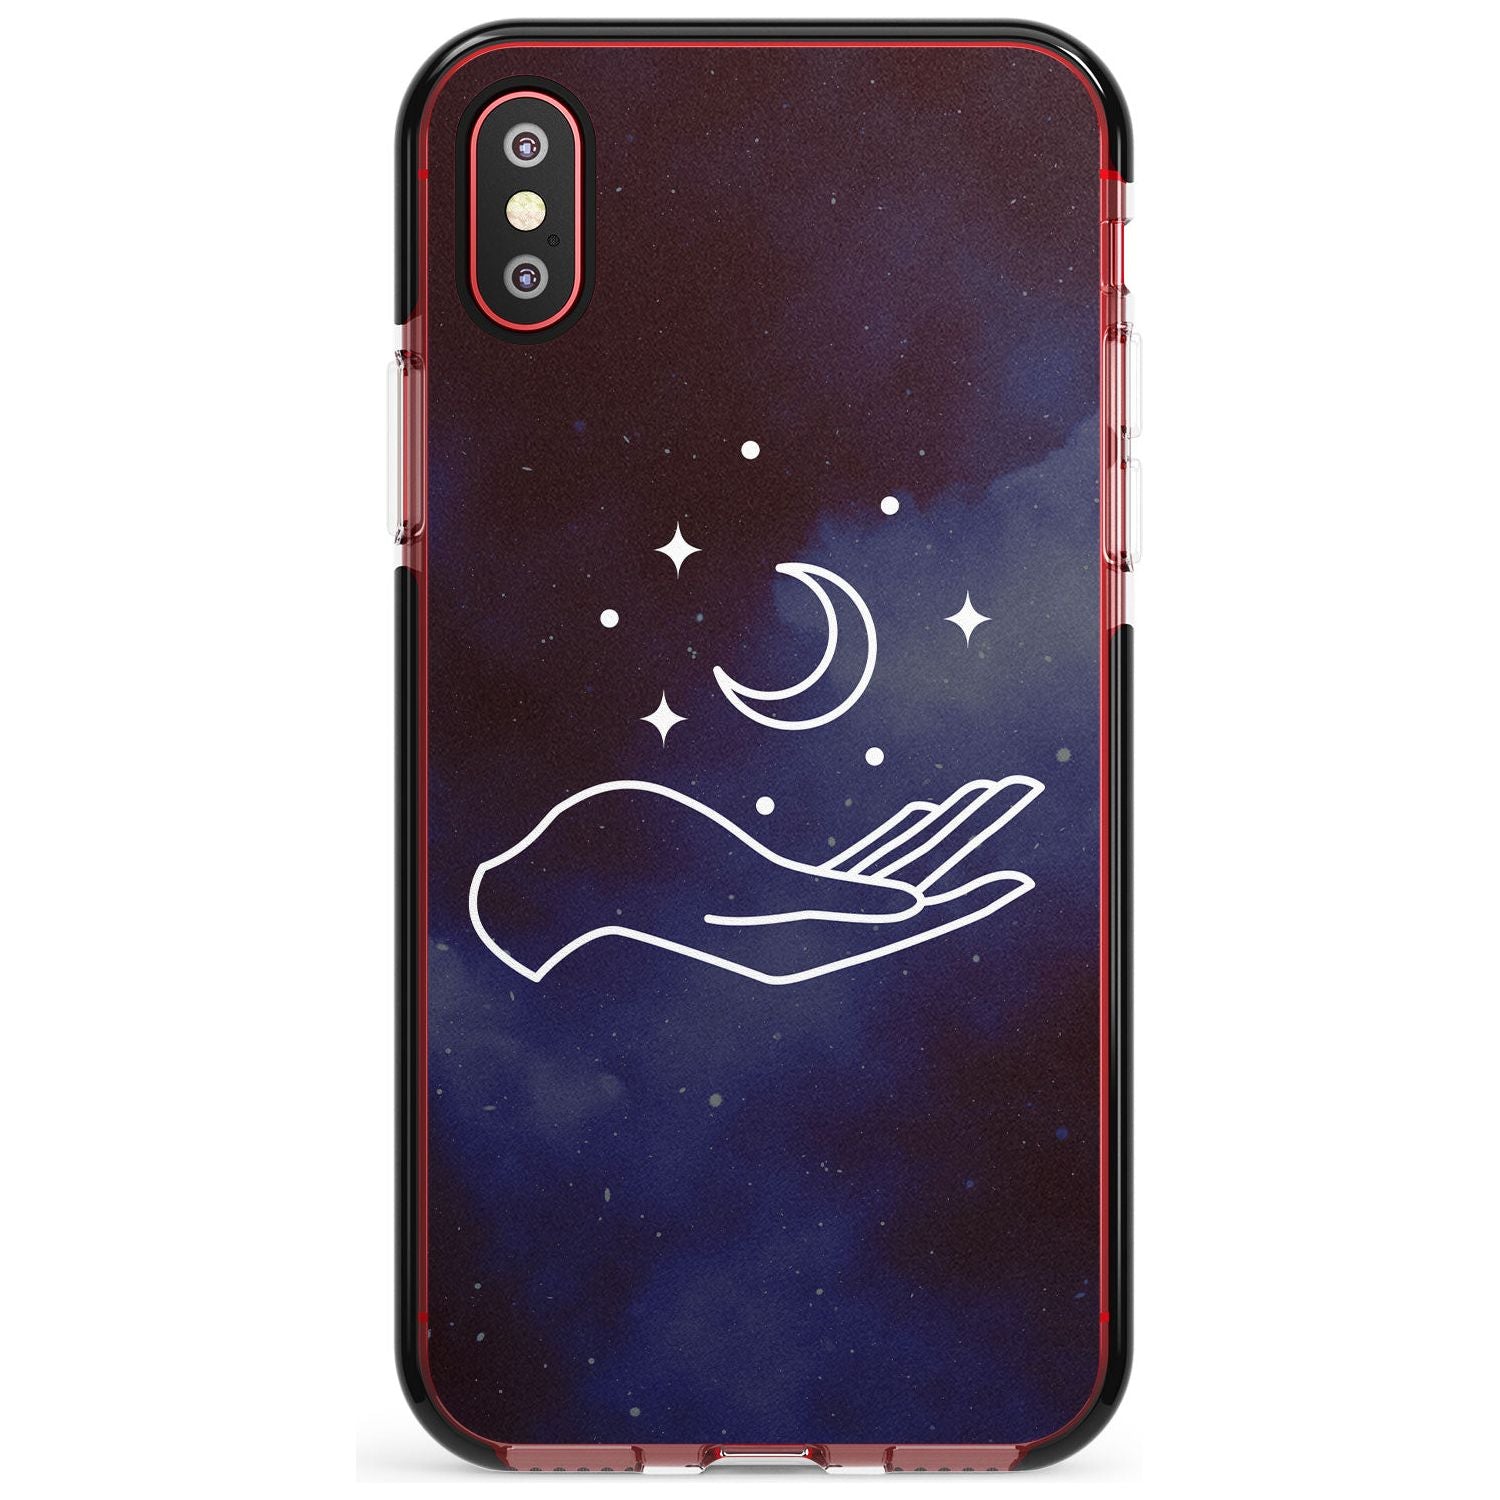 Floating Moon Above Hand Pink Fade Impact Phone Case for iPhone X XS Max XR